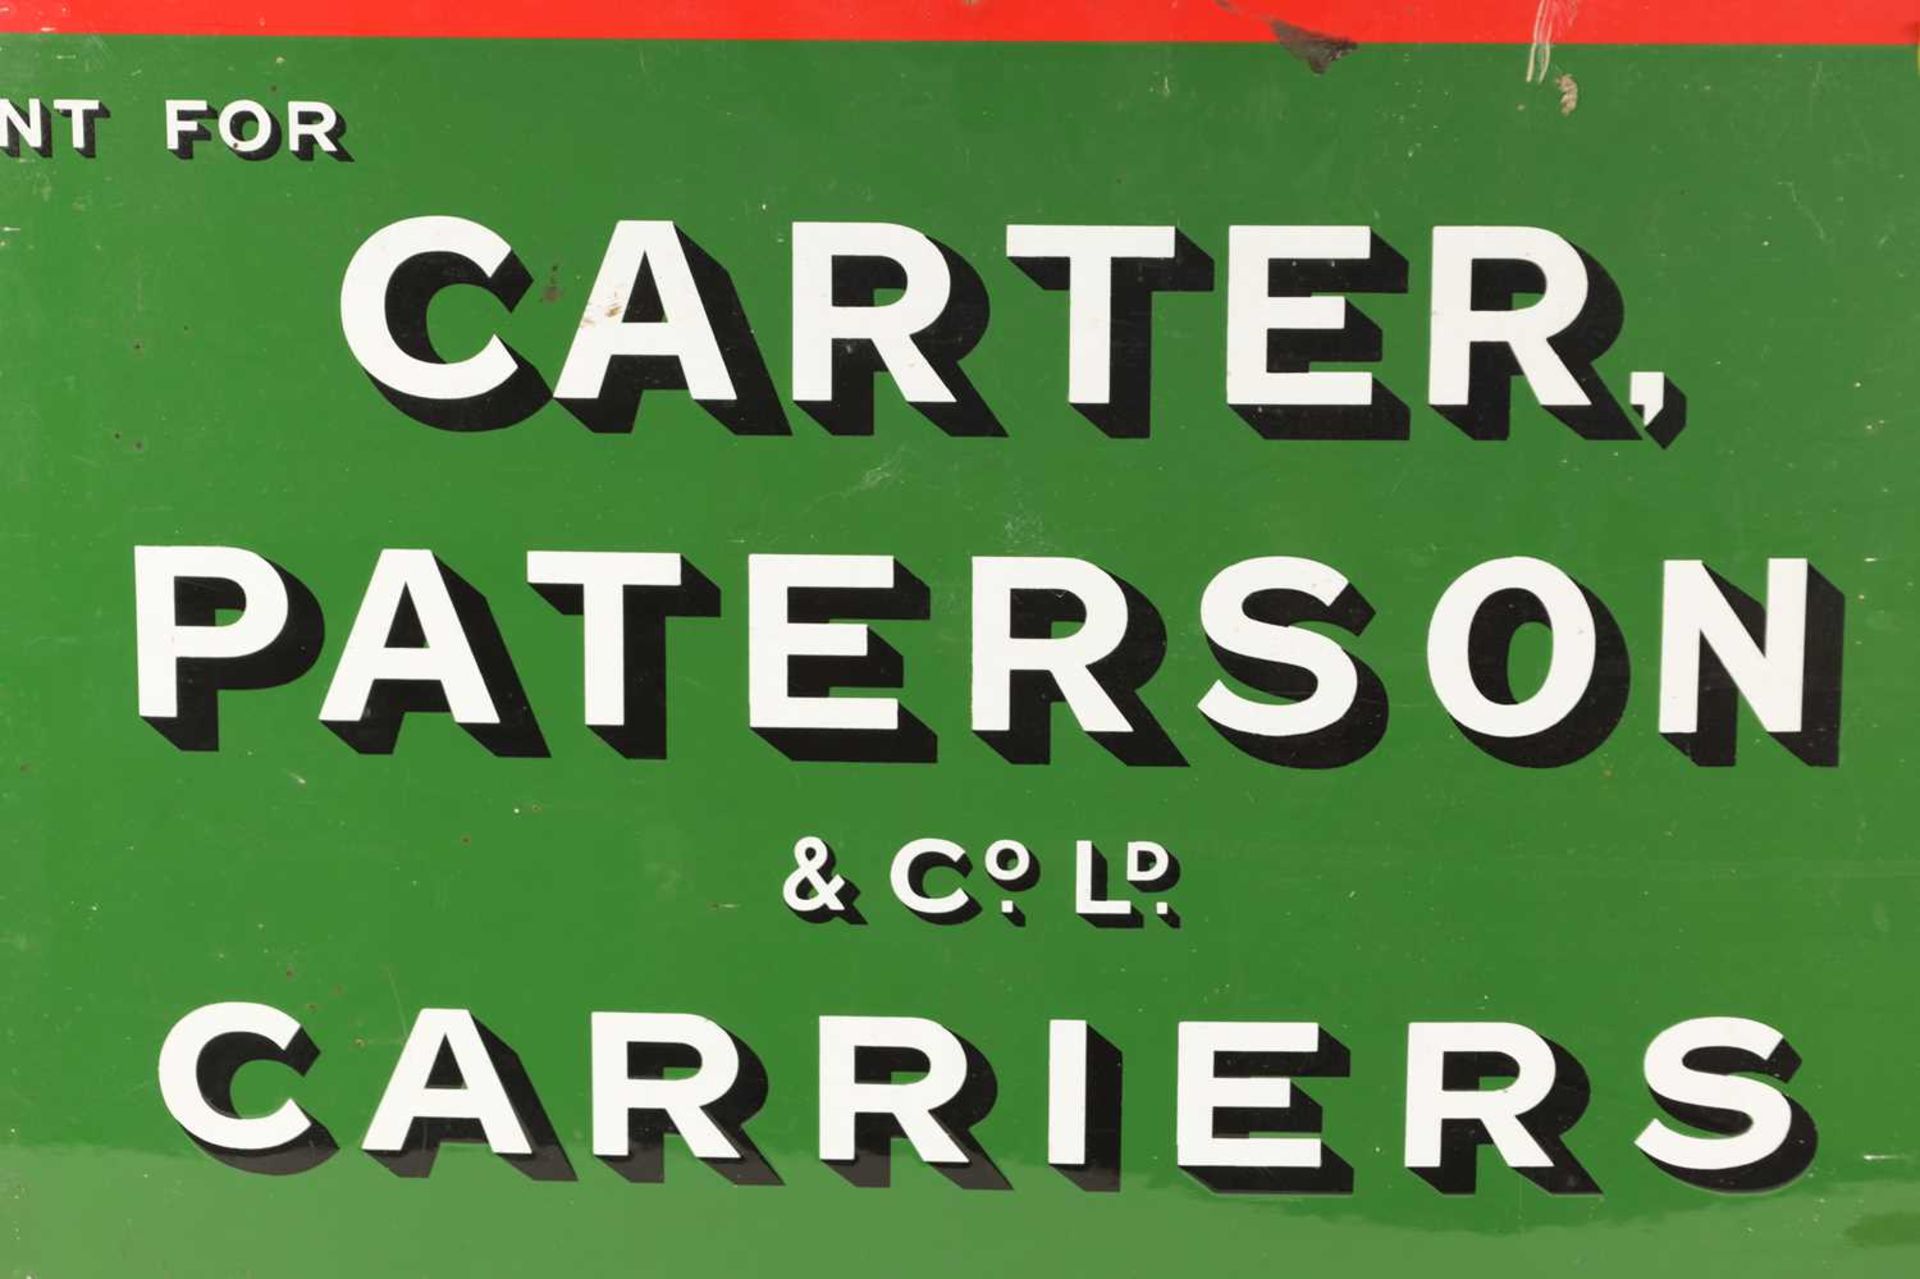 A VINTAGE CARTER PATTERSON & CO. LD. CARRIERS RECTANGULAR ENAMEL SIGN - Image 3 of 10